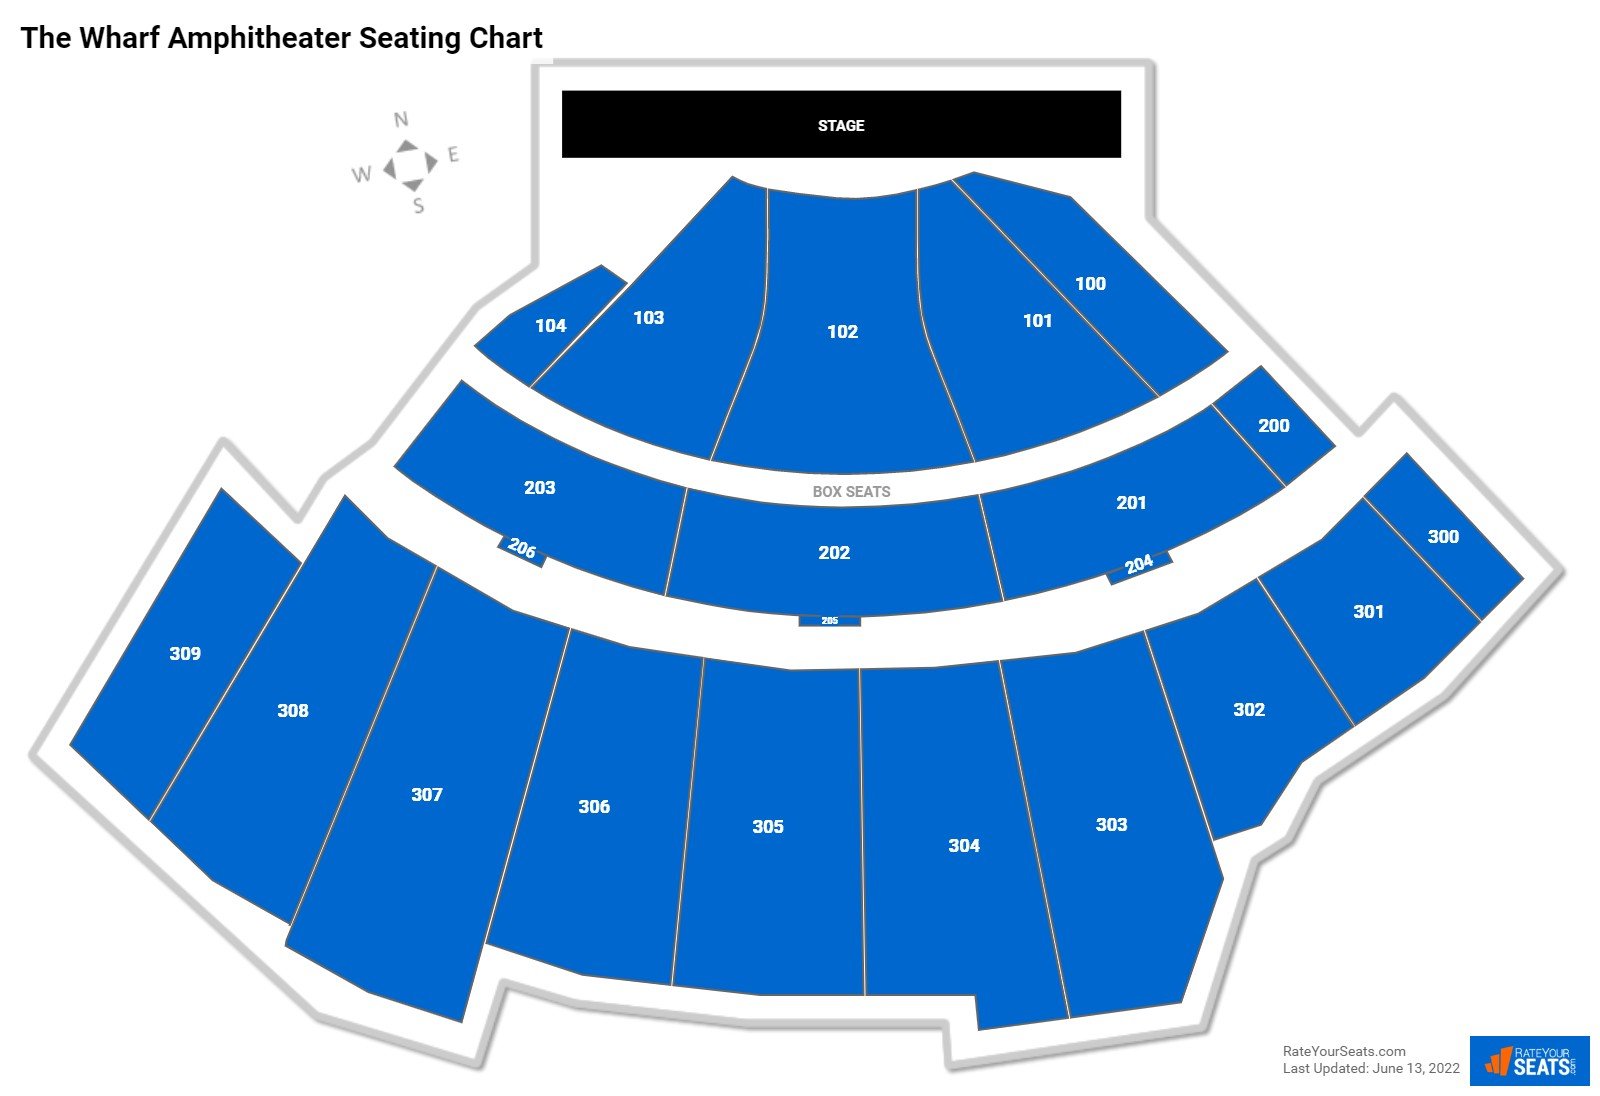 The Wharf Amphitheater Concert Seating Chart